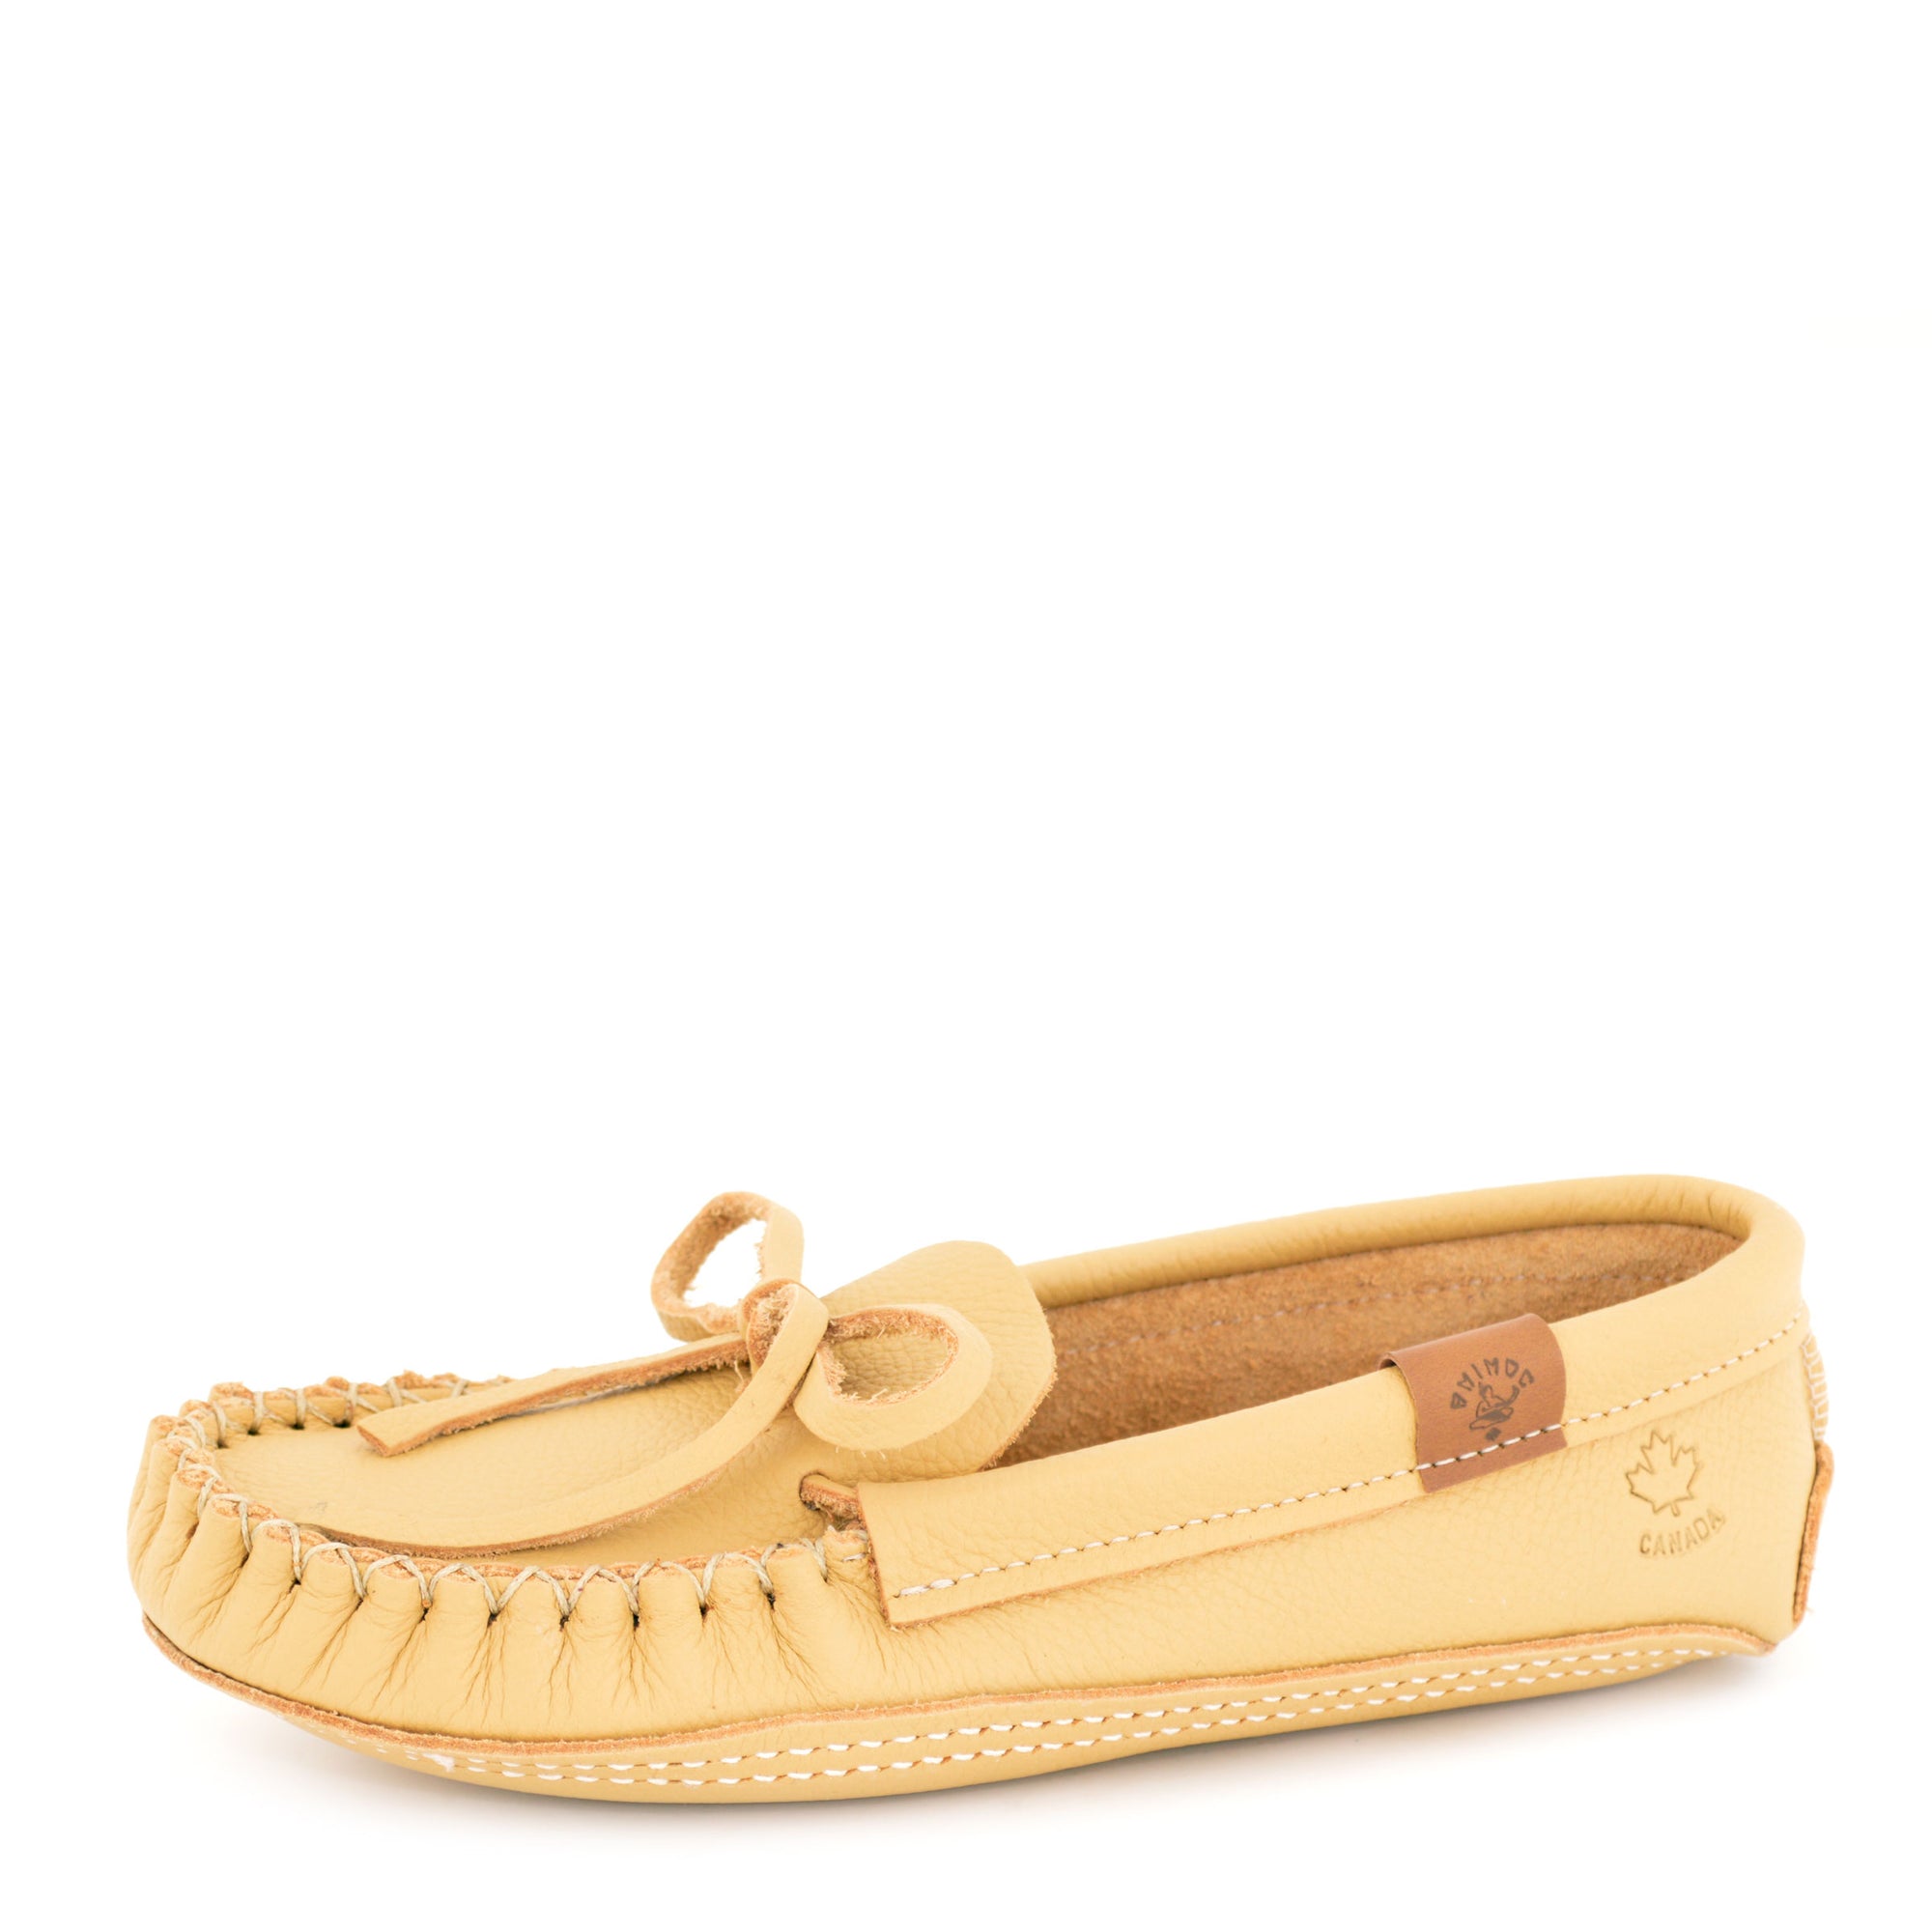 Donoma Moccasin for Women - Tan 